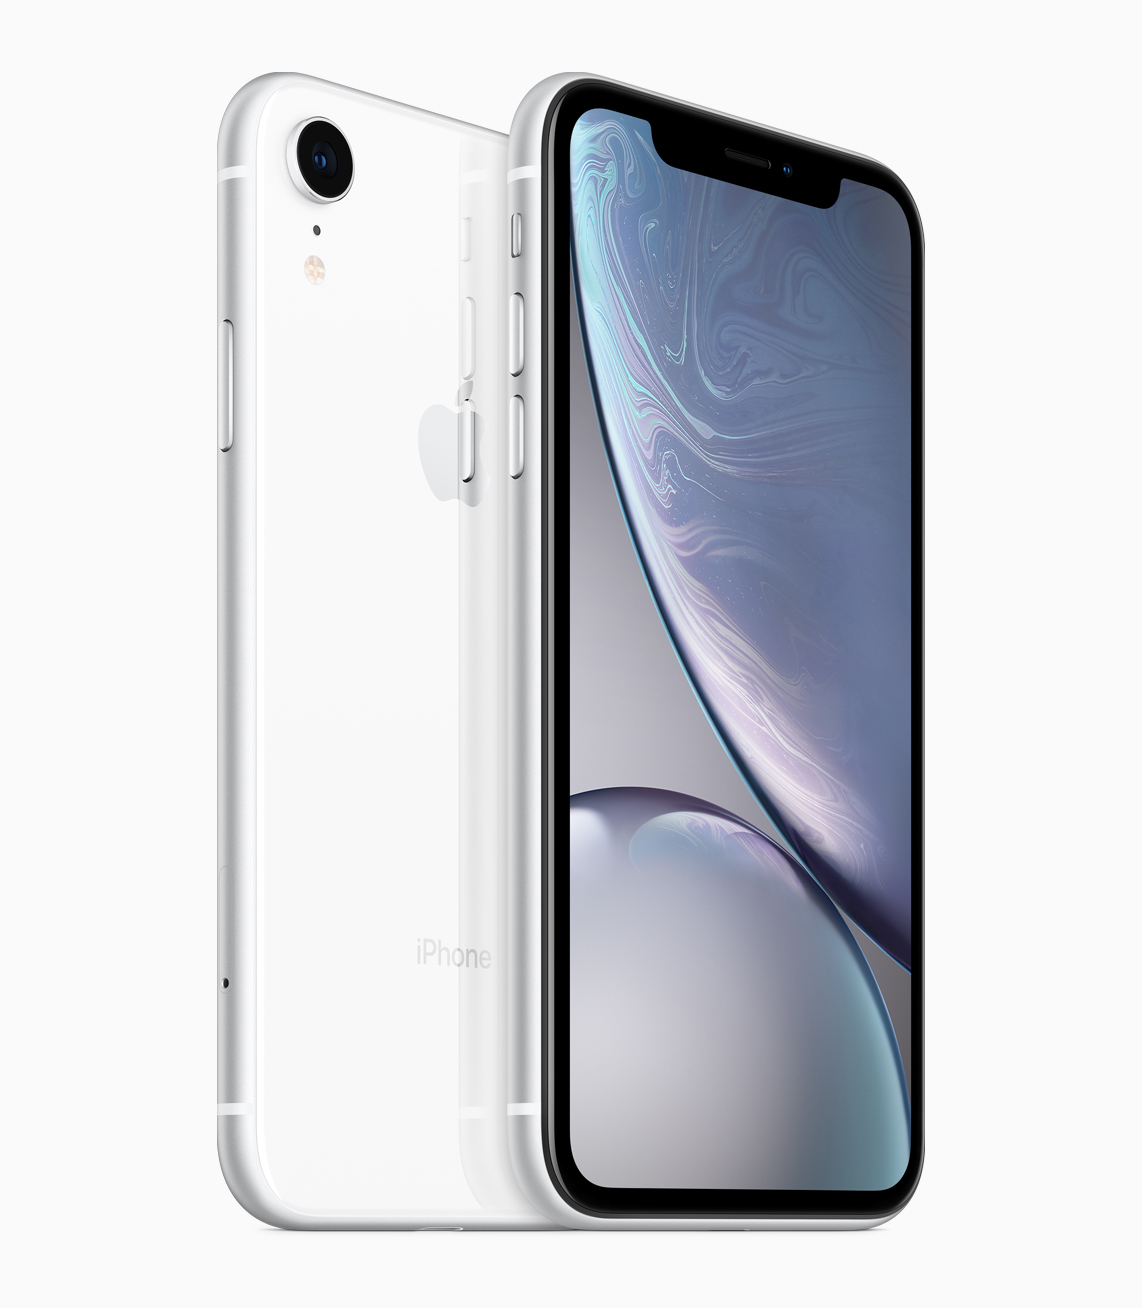 Apple Debuts New iPhone XR - Features 6.1-inch Liquid Retina Display, A12 Bionic Chip, More